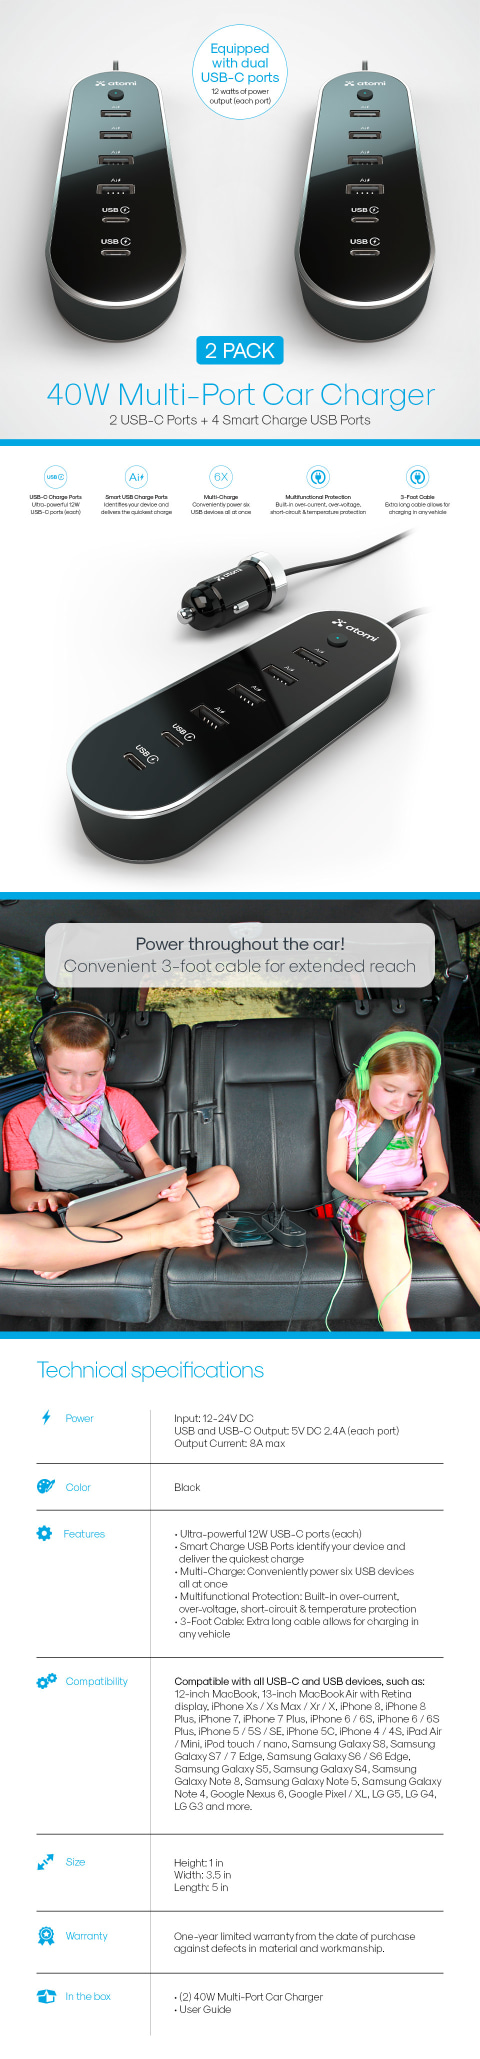 40W Multi-Port Car Charger